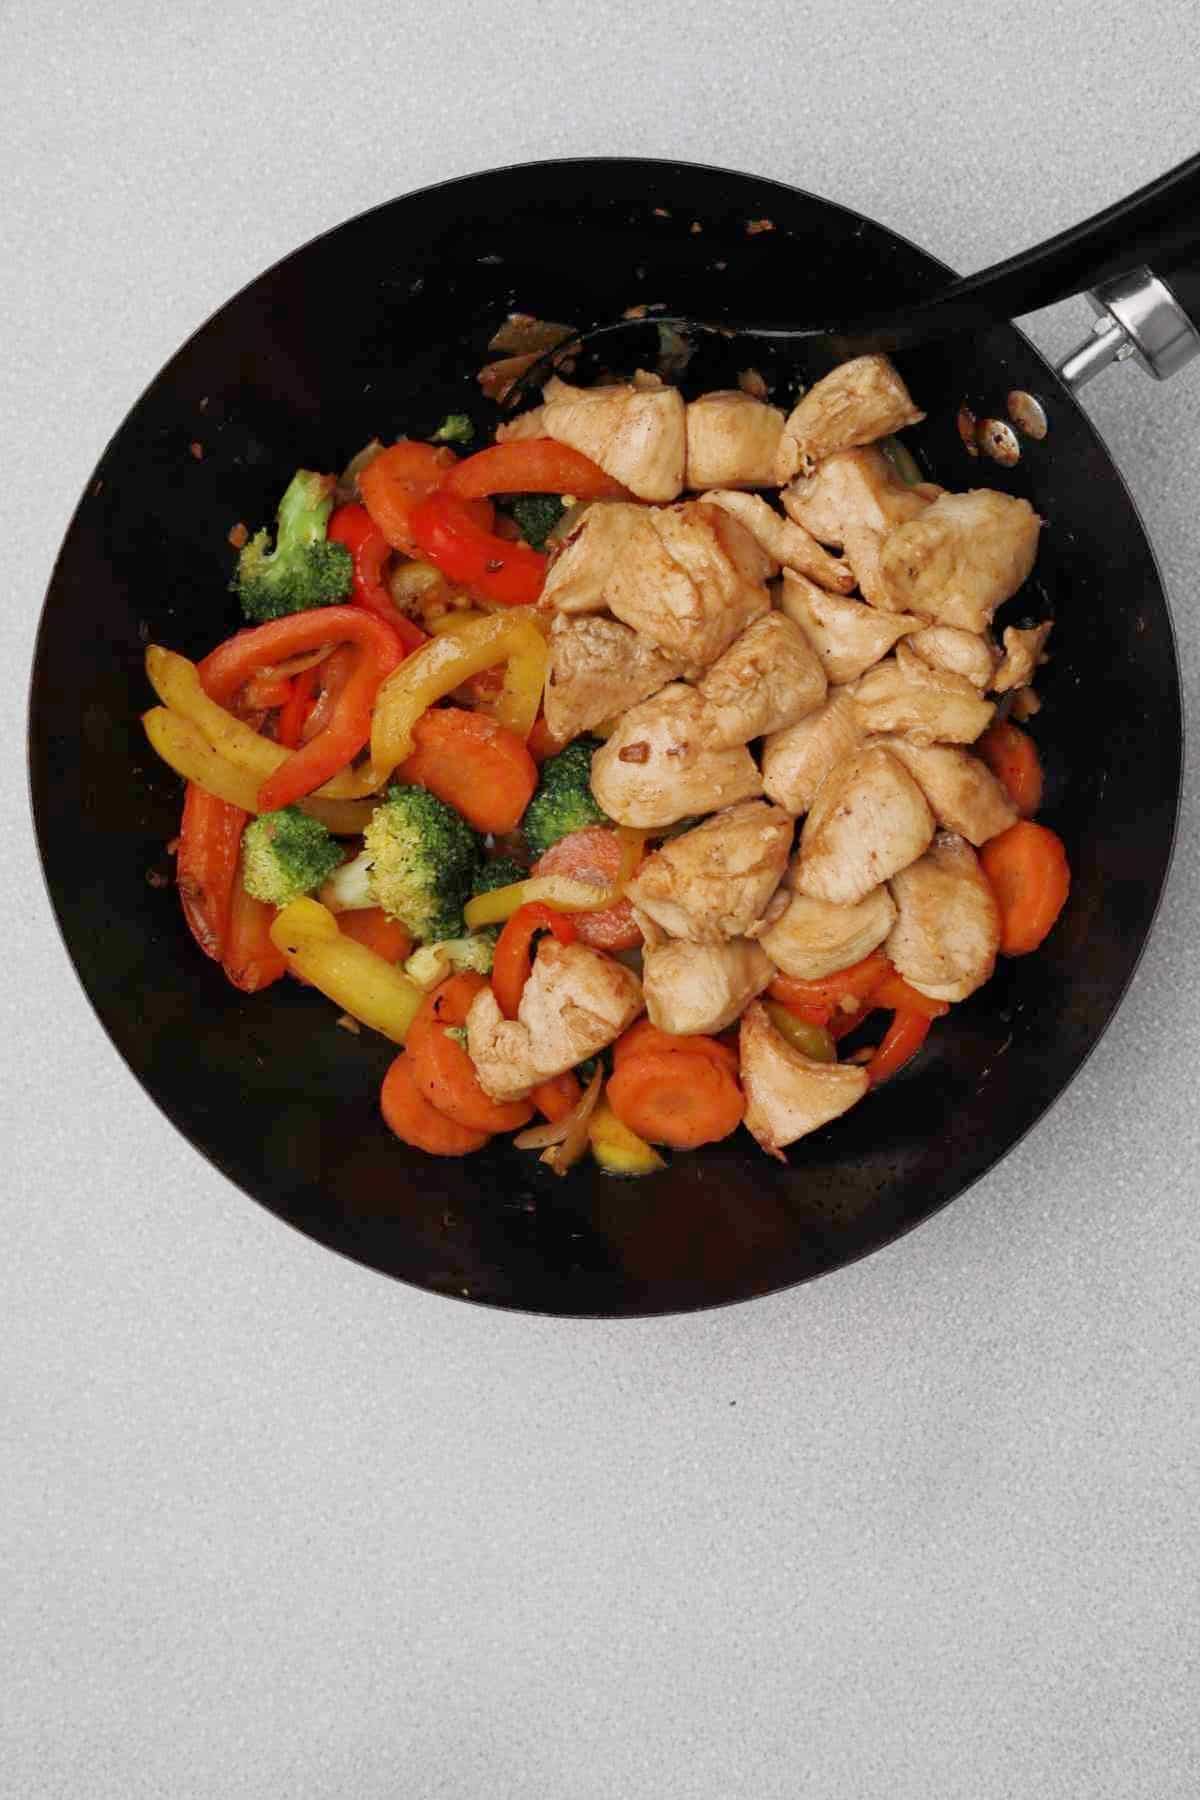 chicken and vegetables in a wok.